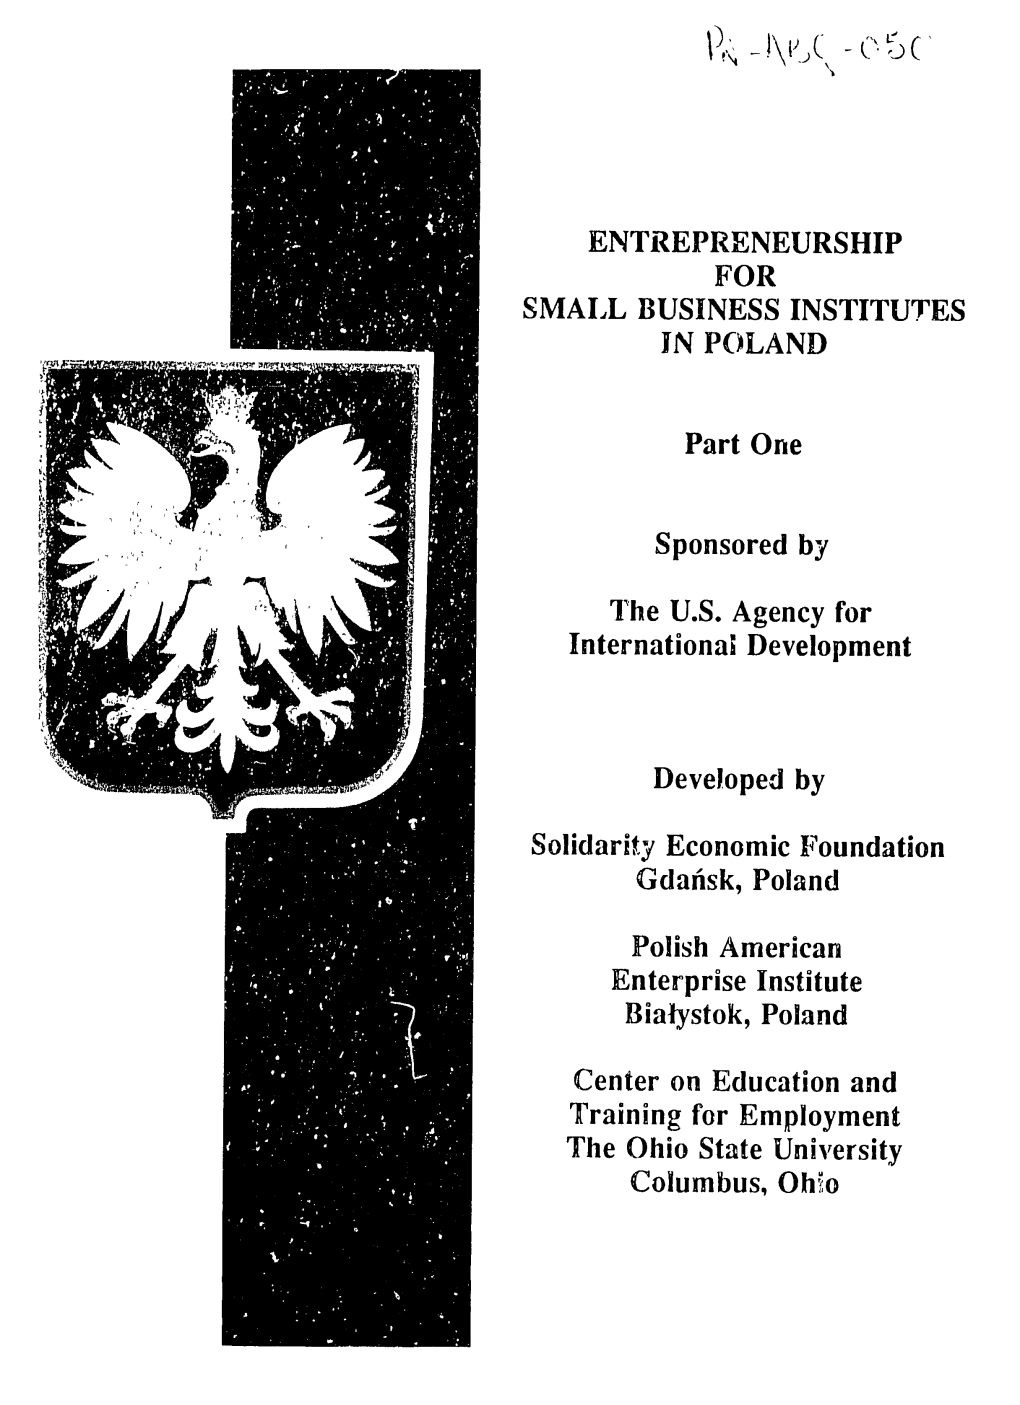 ENTREPRENEURSHIP for SMALL BUSINESS INSTITUTES in POLAND Part One Sponsored by the U.S. Agency for International Developm